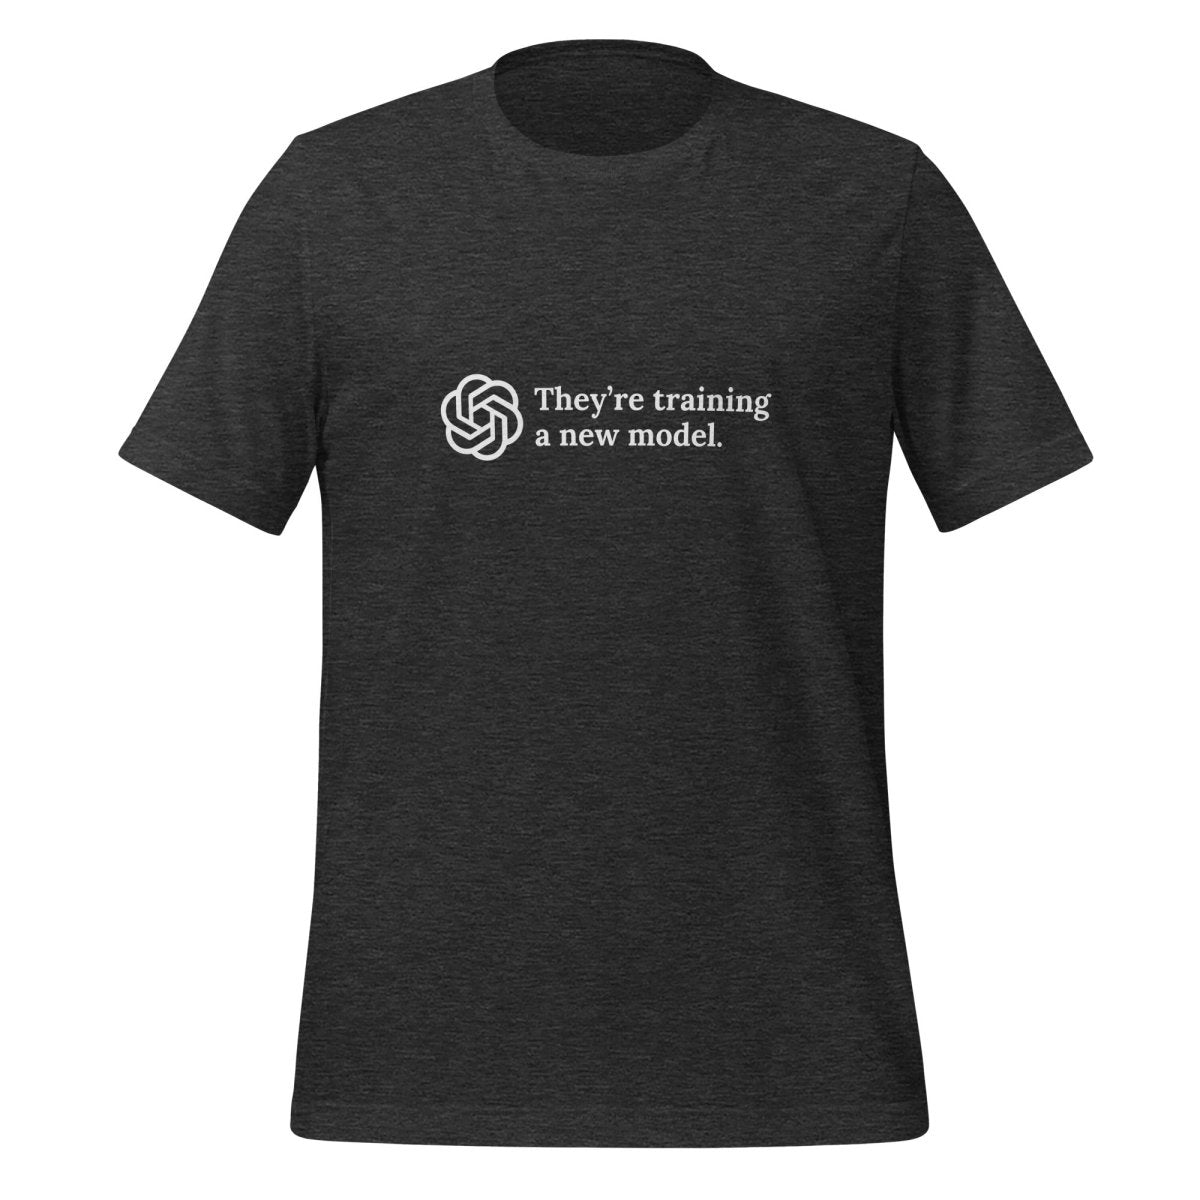 They're training a new model. T - Shirt (unisex) - Dark Grey Heather - AI Store